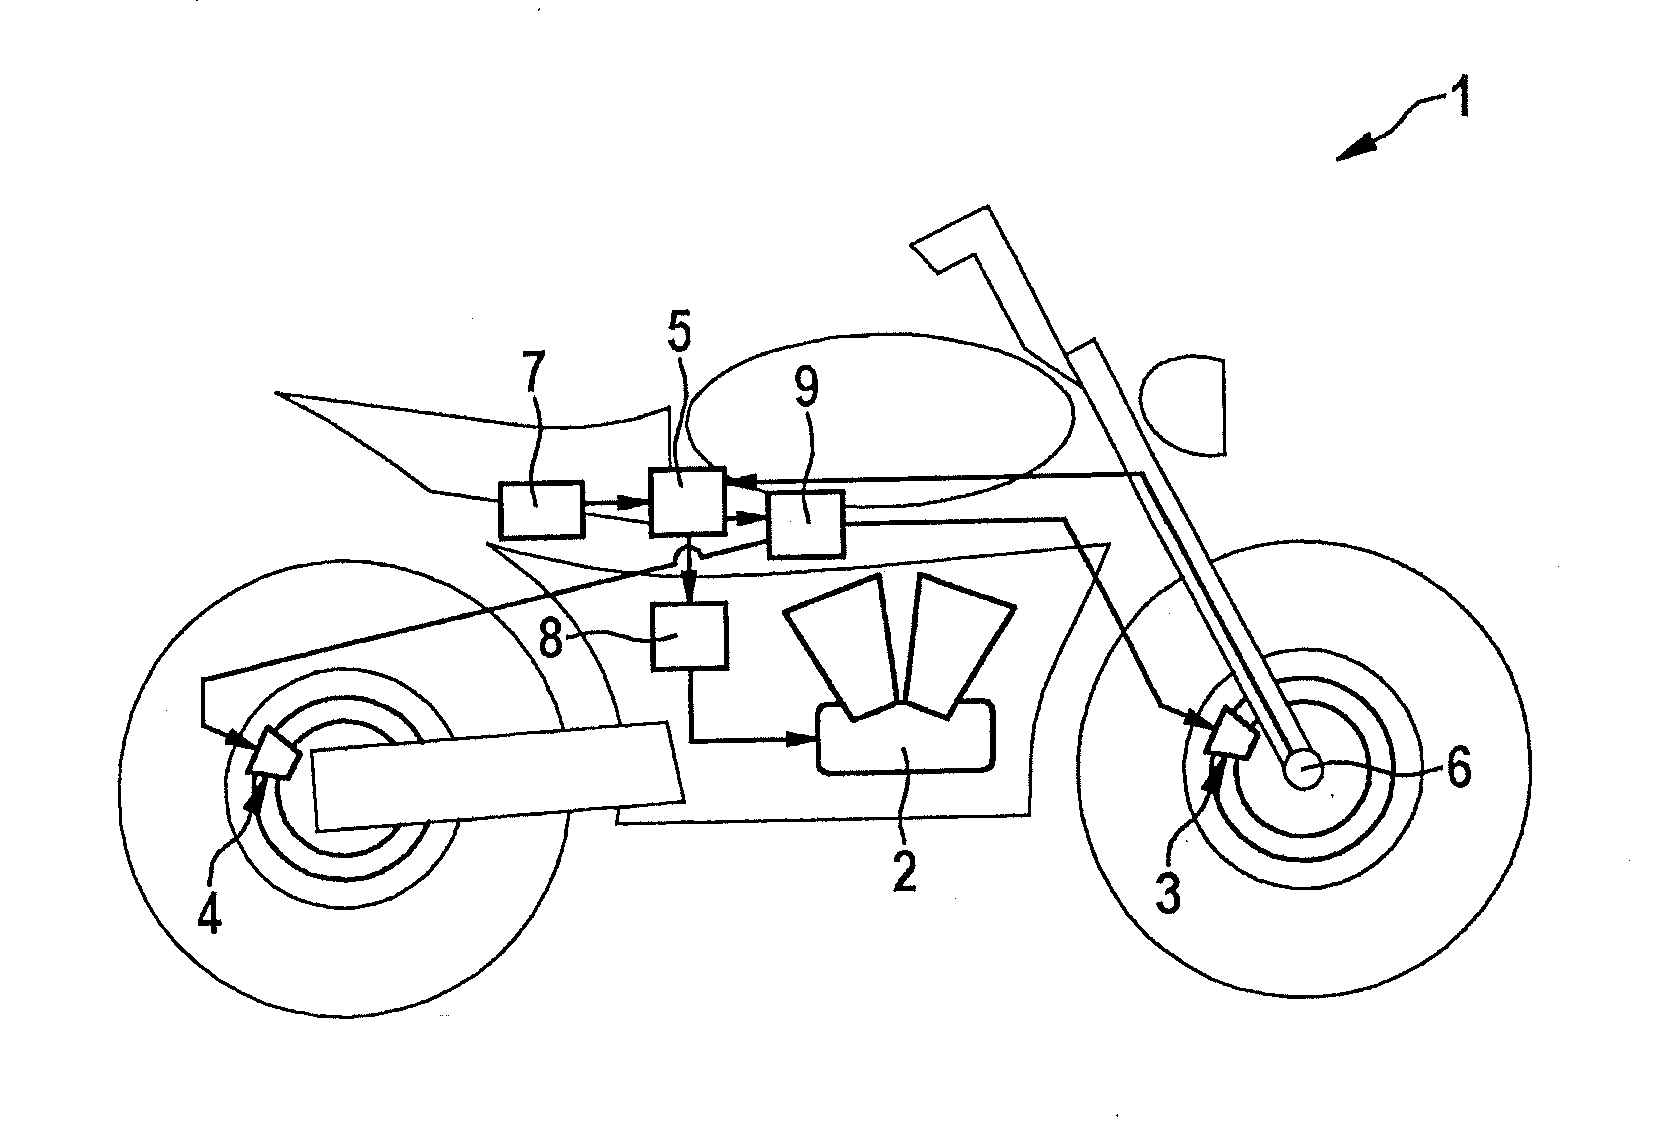 Method for stabilizing a two wheeled vehicle